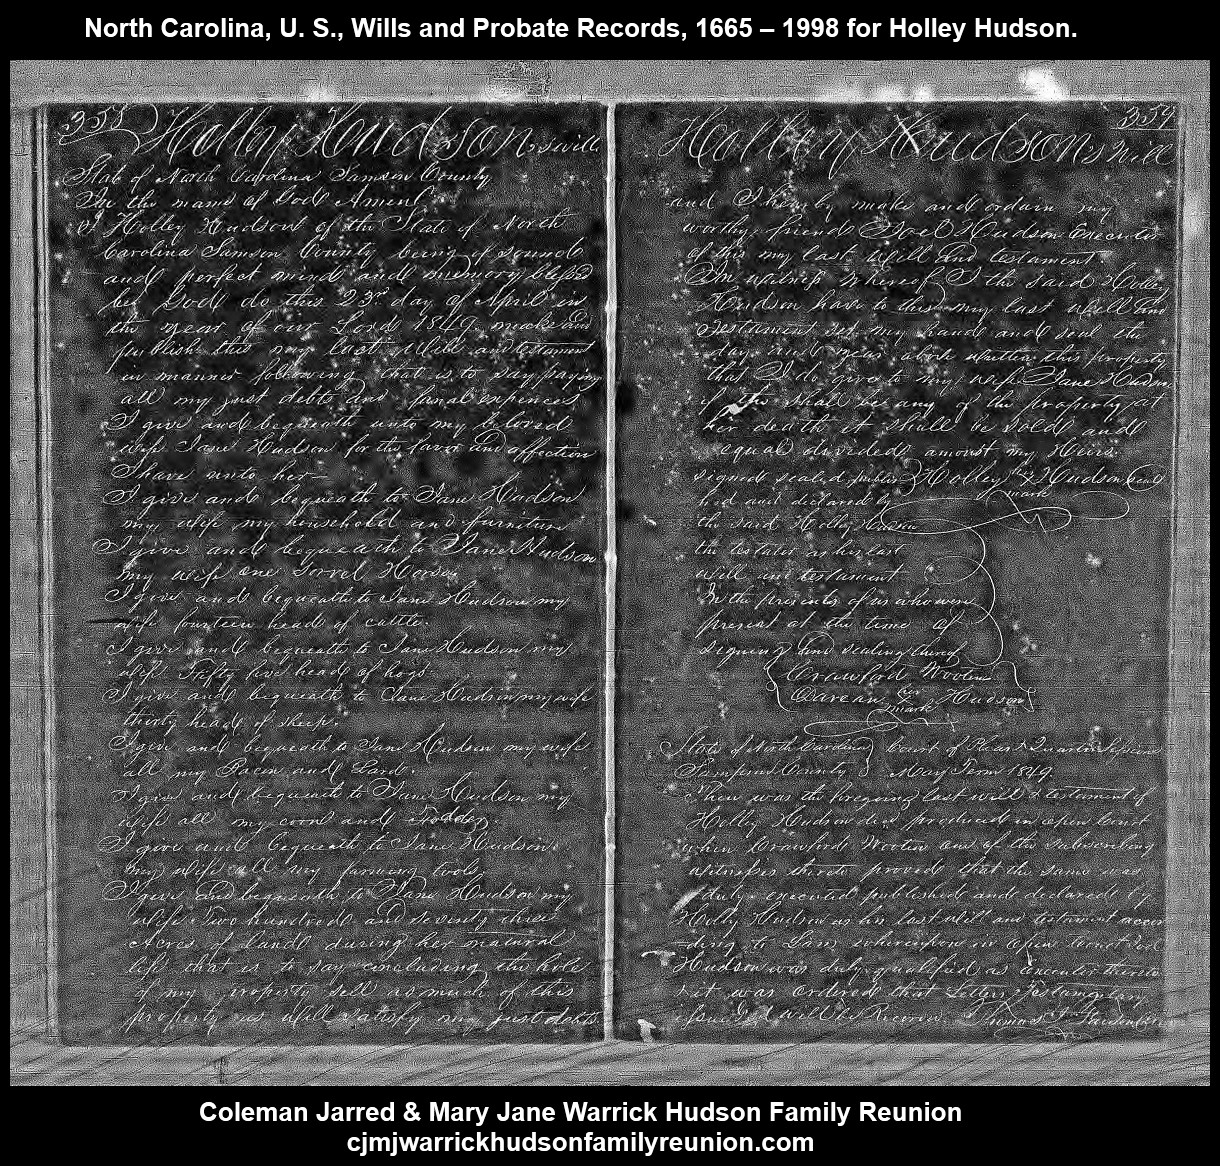 1849, 4-23 -  Holley Hudson's Will  (Inverted Print Colors) (Both Pages)